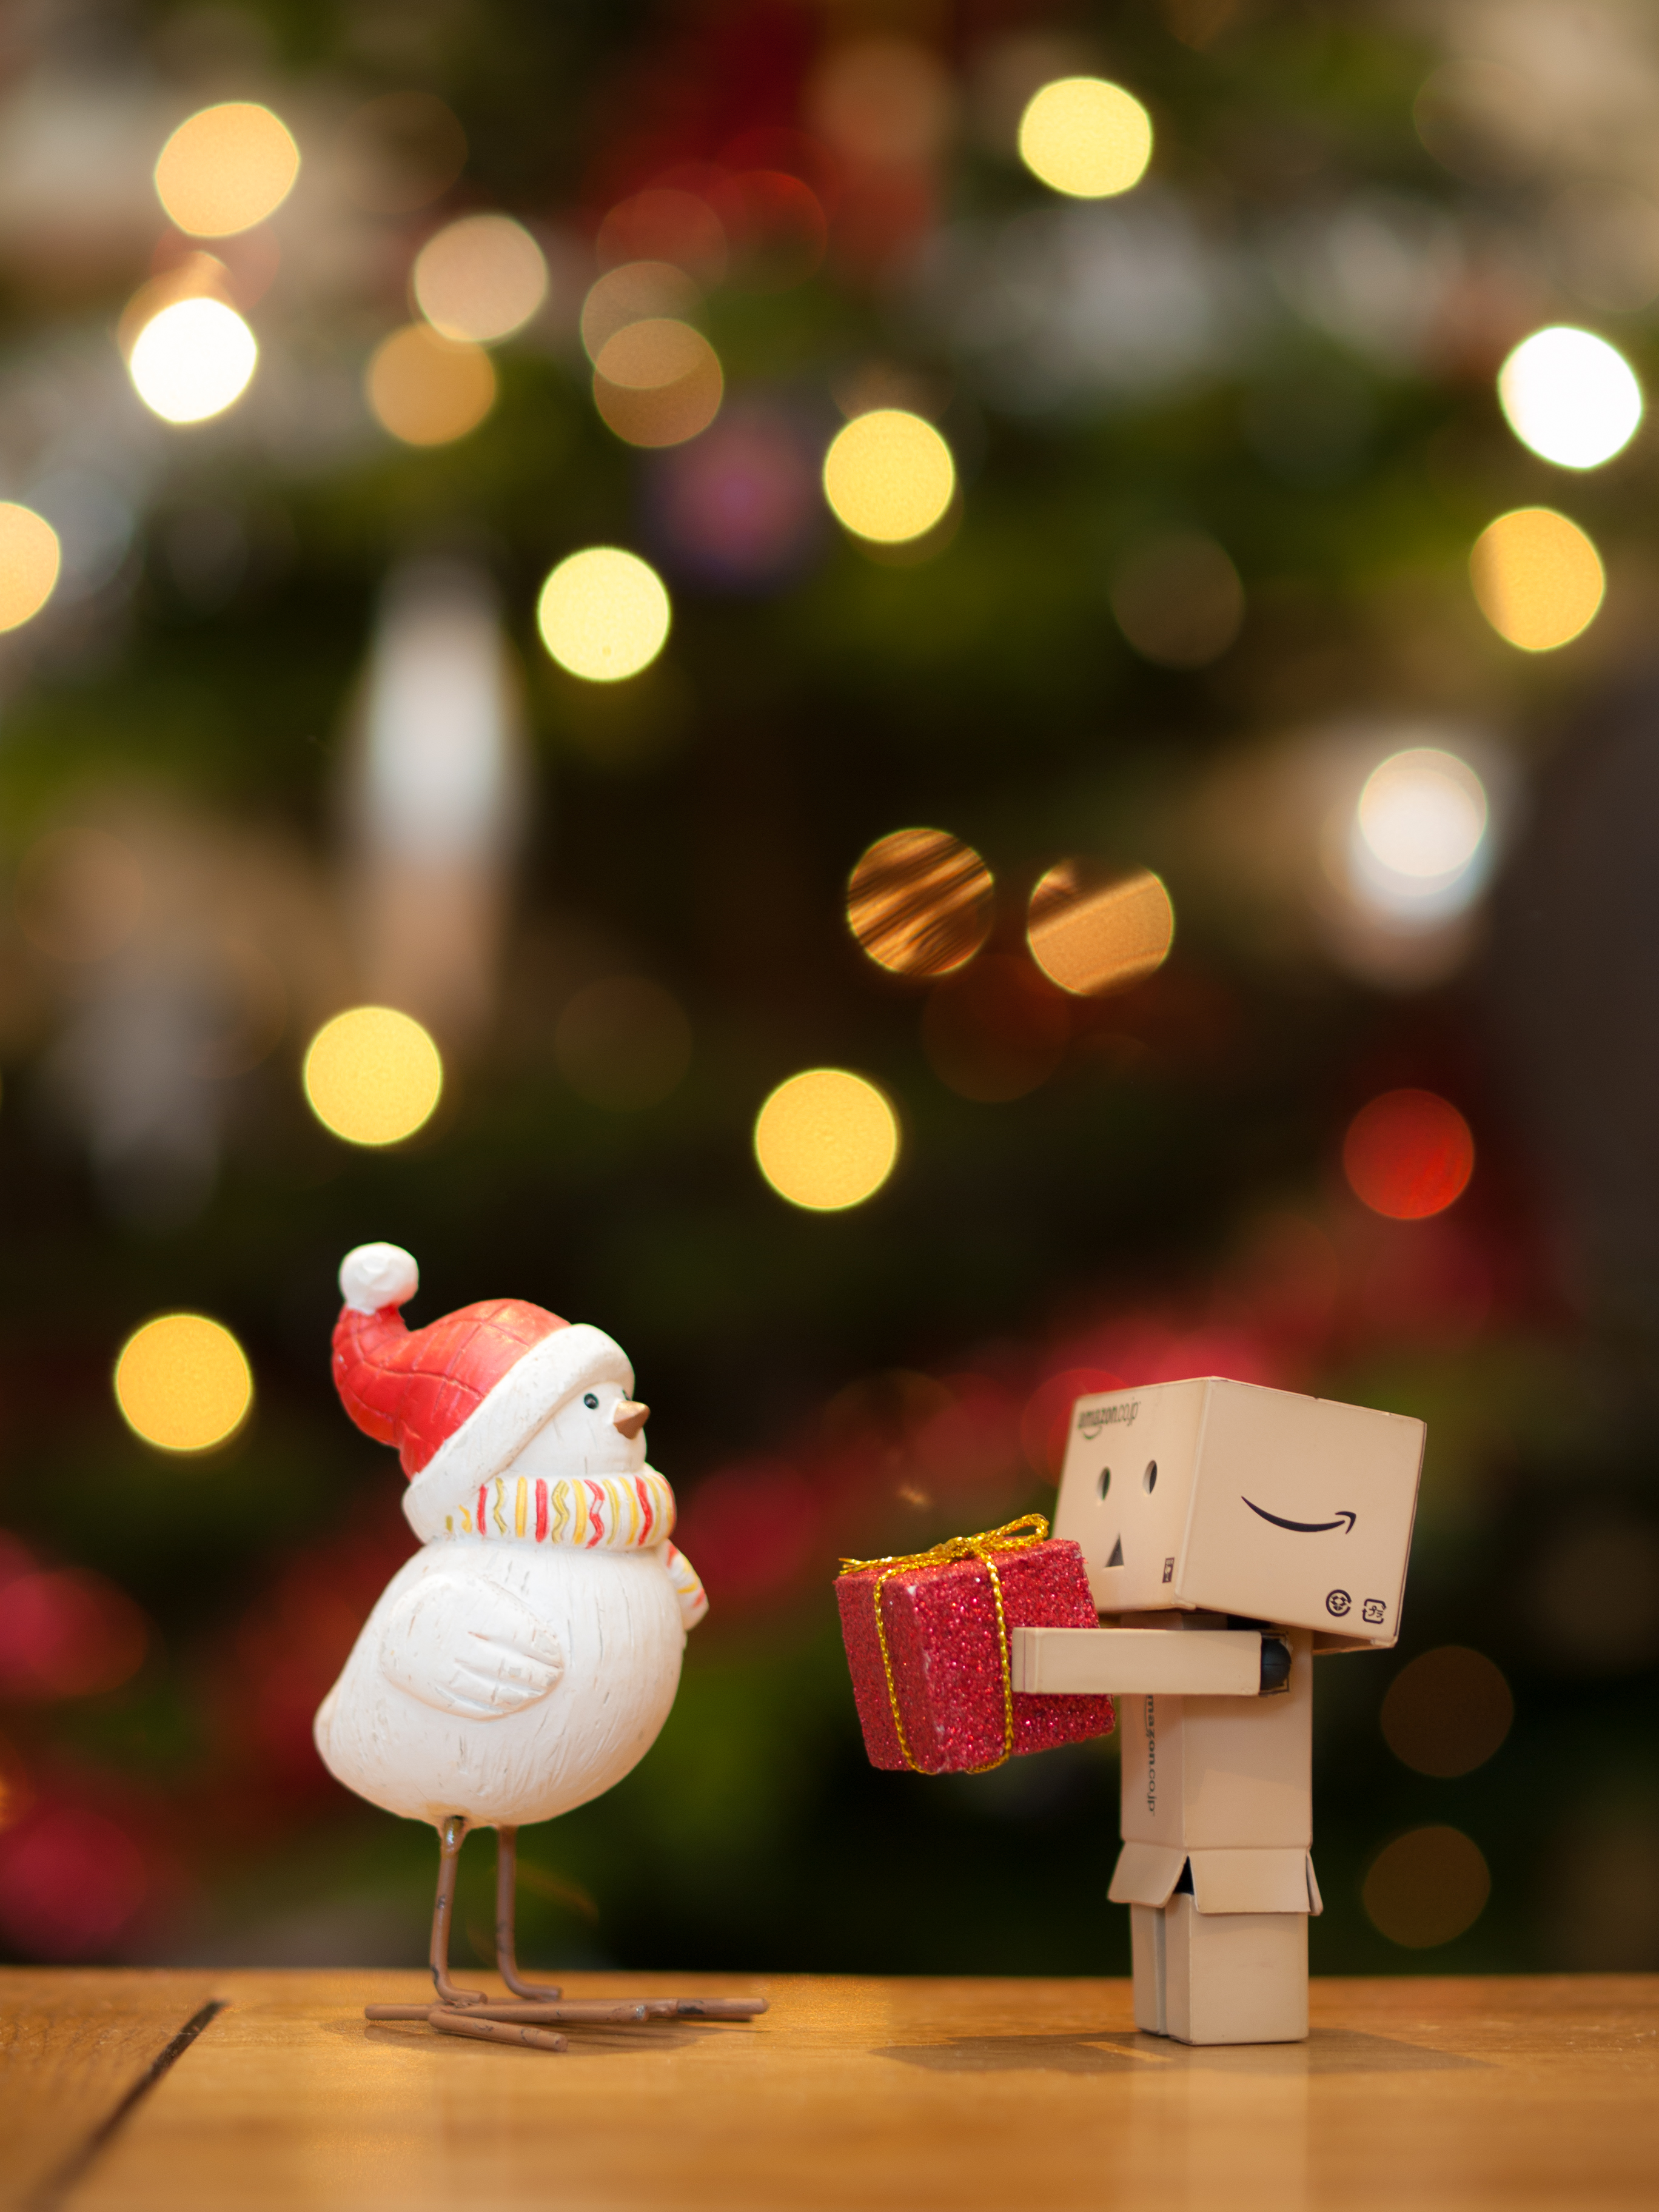 cardboard robot, miscellanea, miscellaneous, christmas, present, gift, danbo, chick, chicken Phone Background